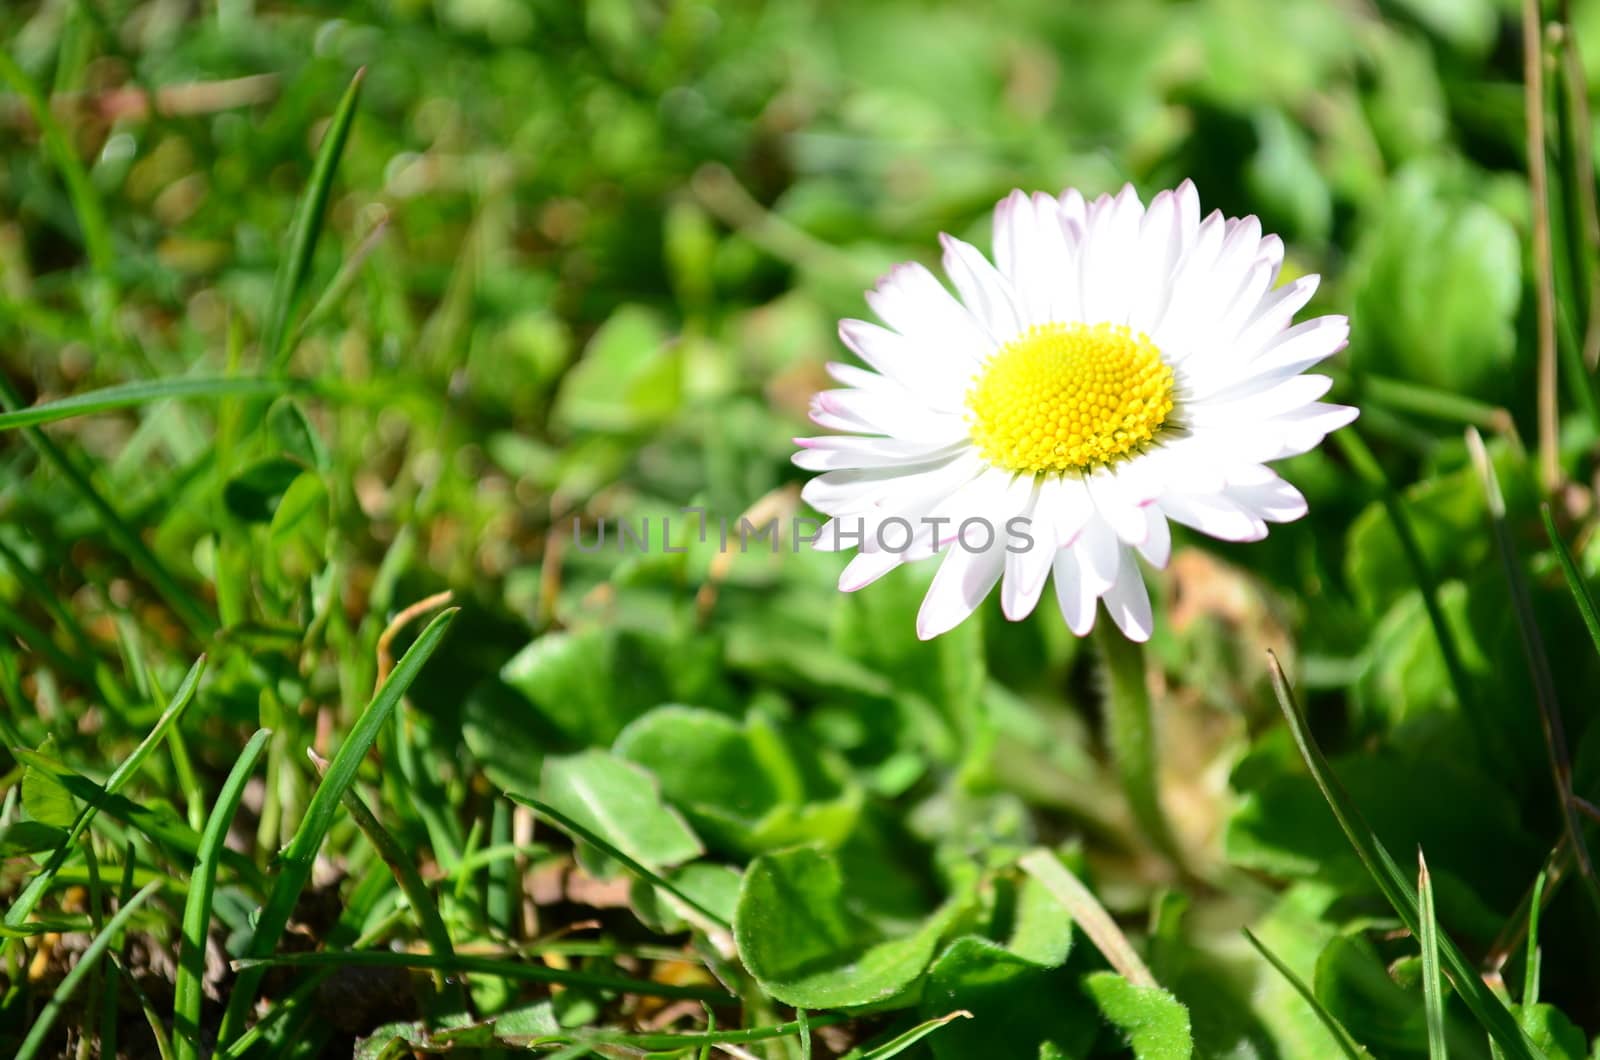 Single and young daisy flower growing up in green grass field